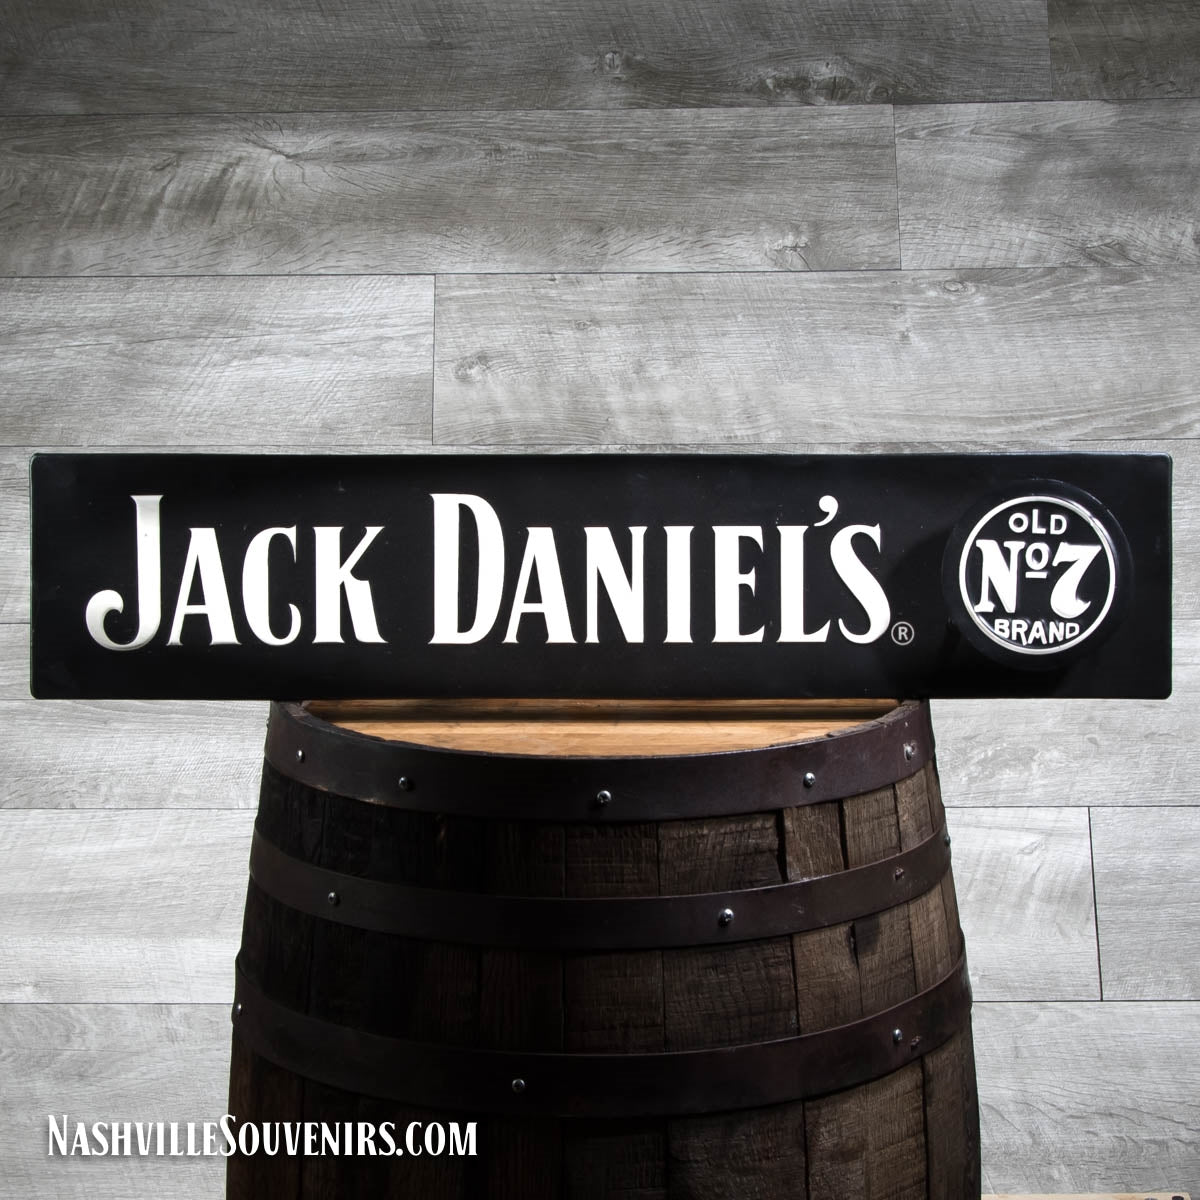 The JD metal sign is made from two tiers of embossed metal and features a big bold Jack Daniel's along with an Old No.7 Brand logo. The Old No.7 logo is attached separately with three anchor points giving it a beautiful dimensional touch. See the alternate photo for the close-up details in this metal sign